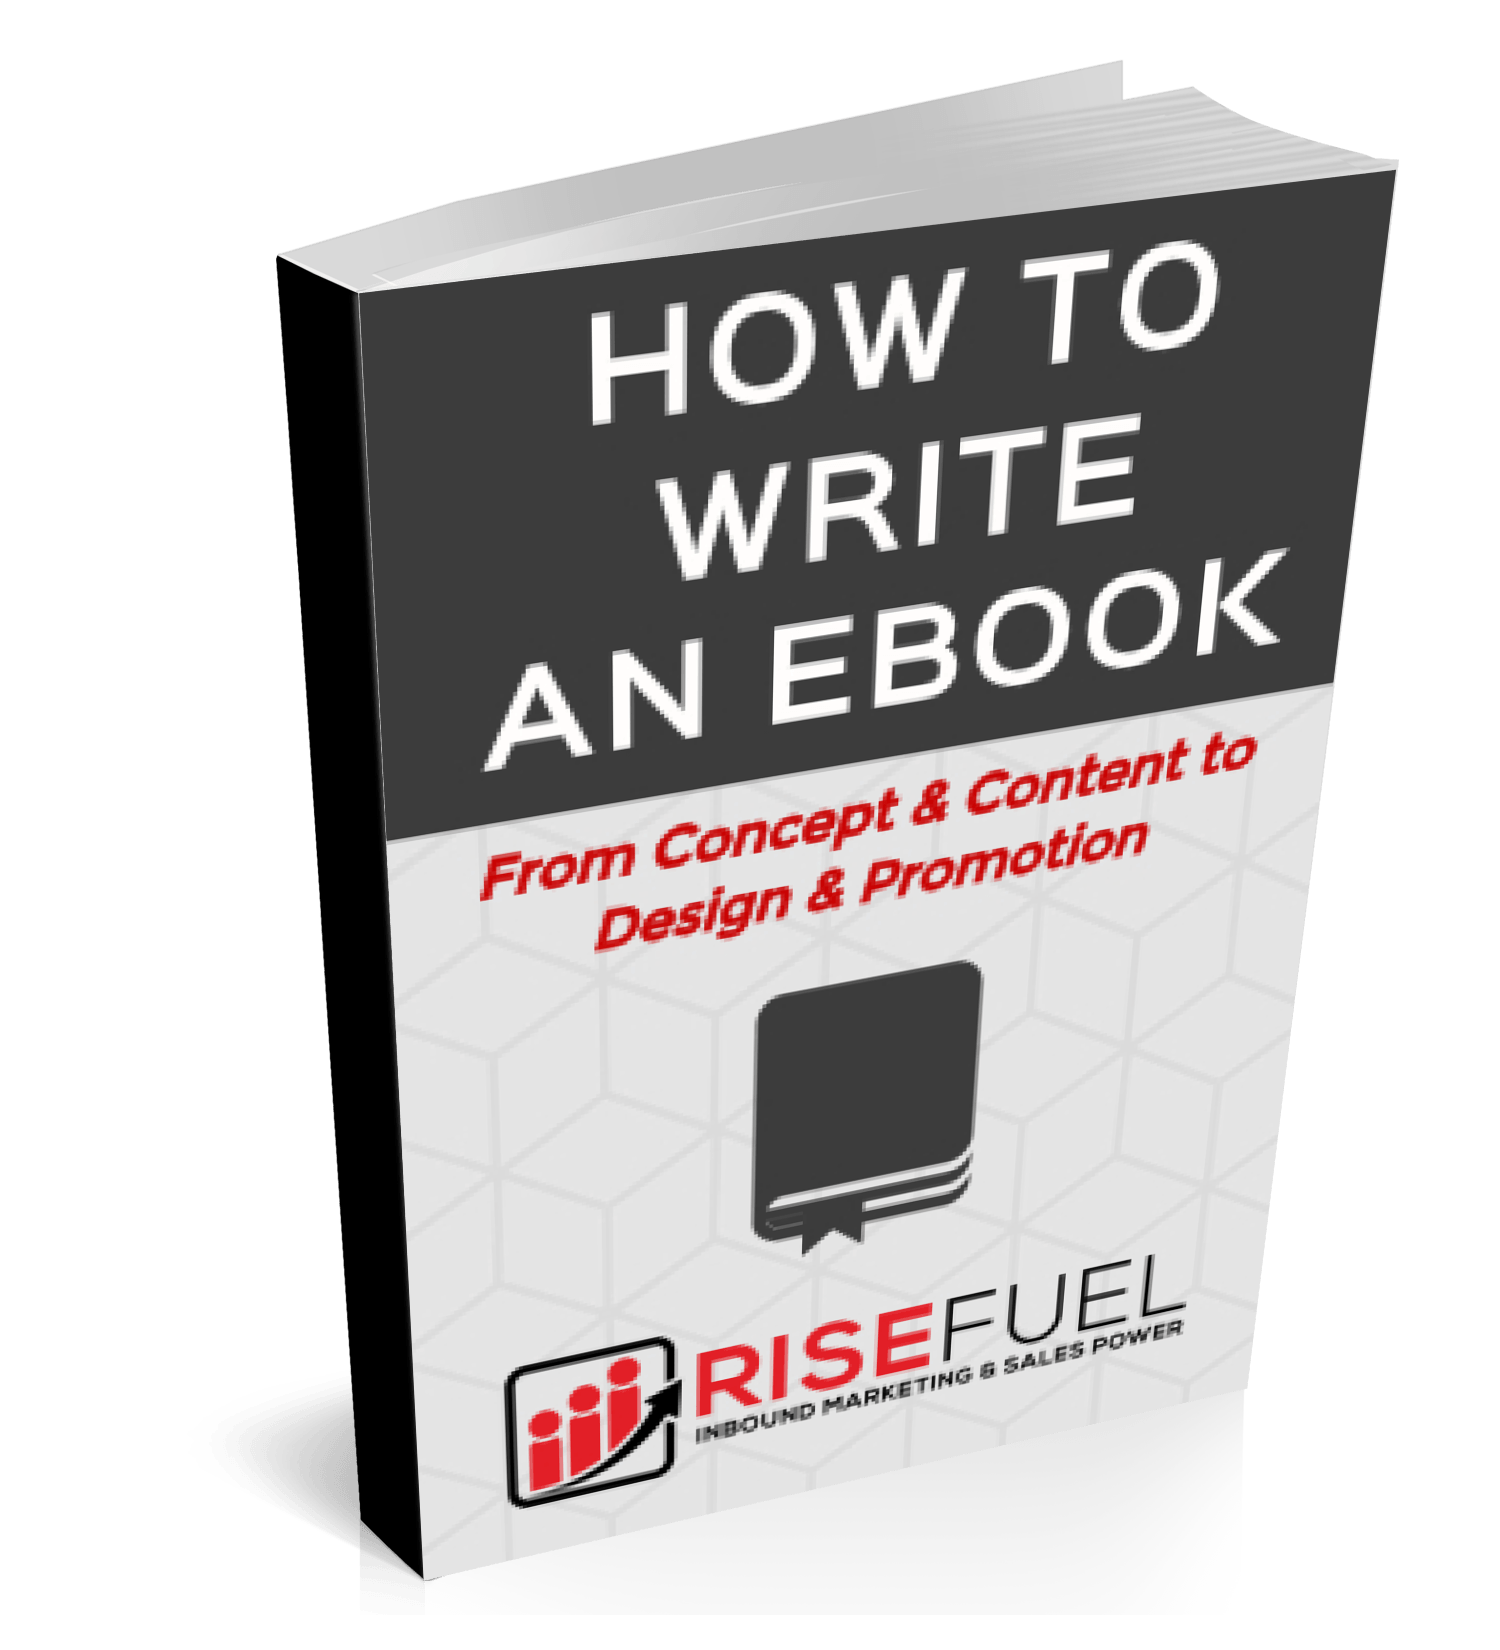 HOW TO WRITE AN EBOOK